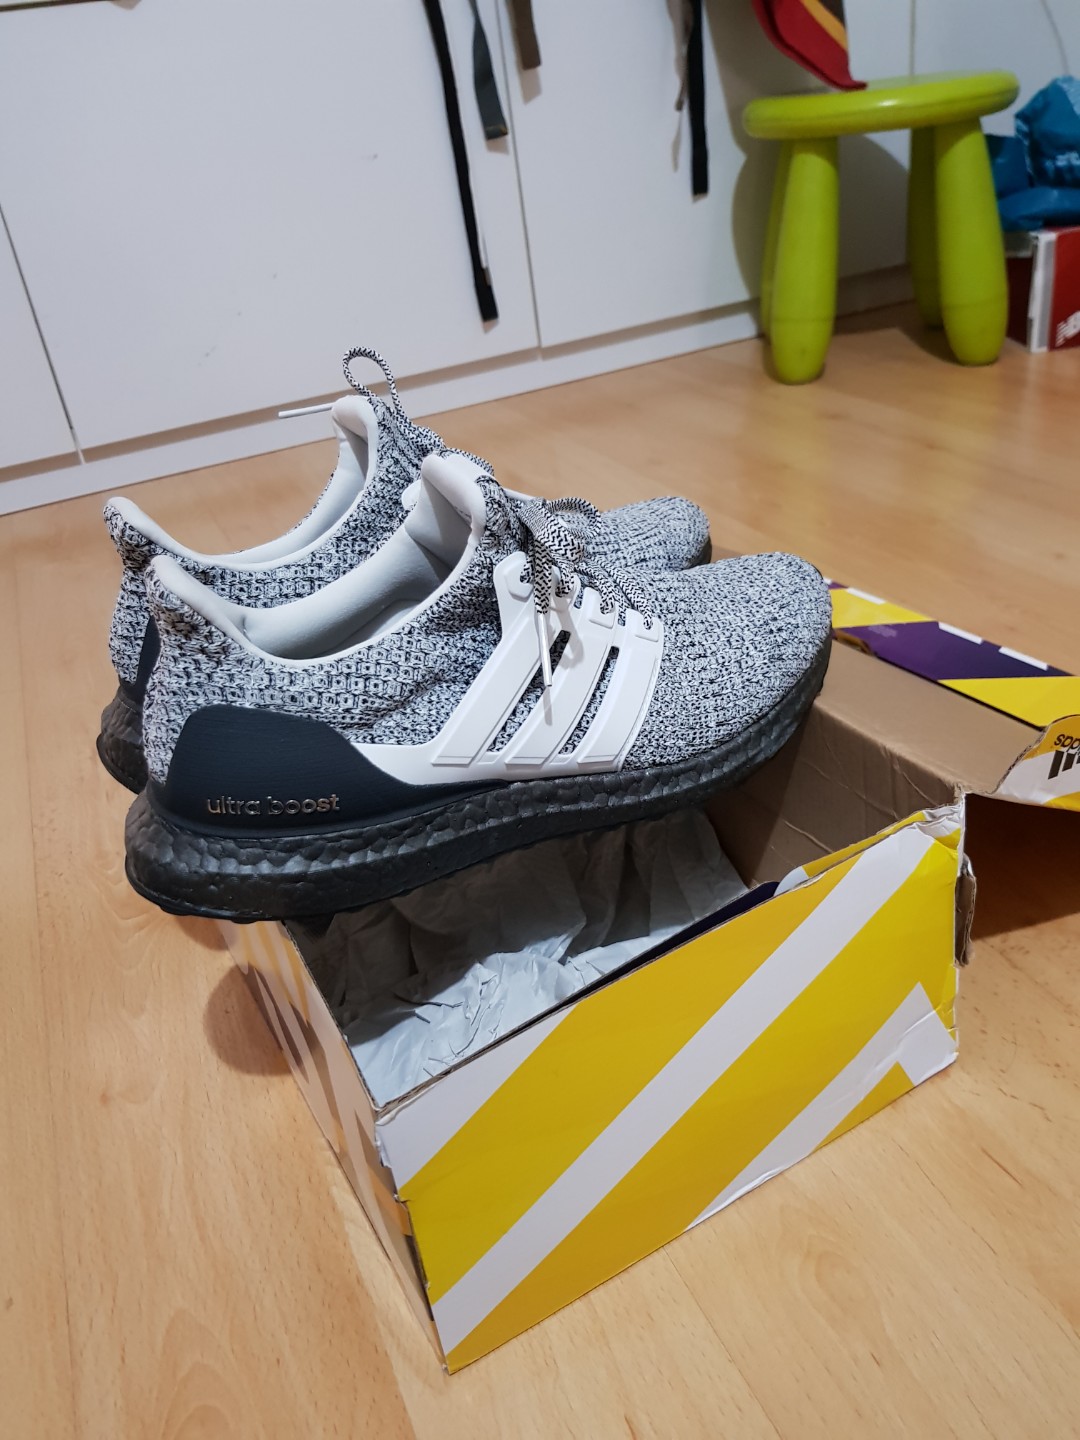 Adidas Ultra Boost Olympic Gold Medal leather cage size 9